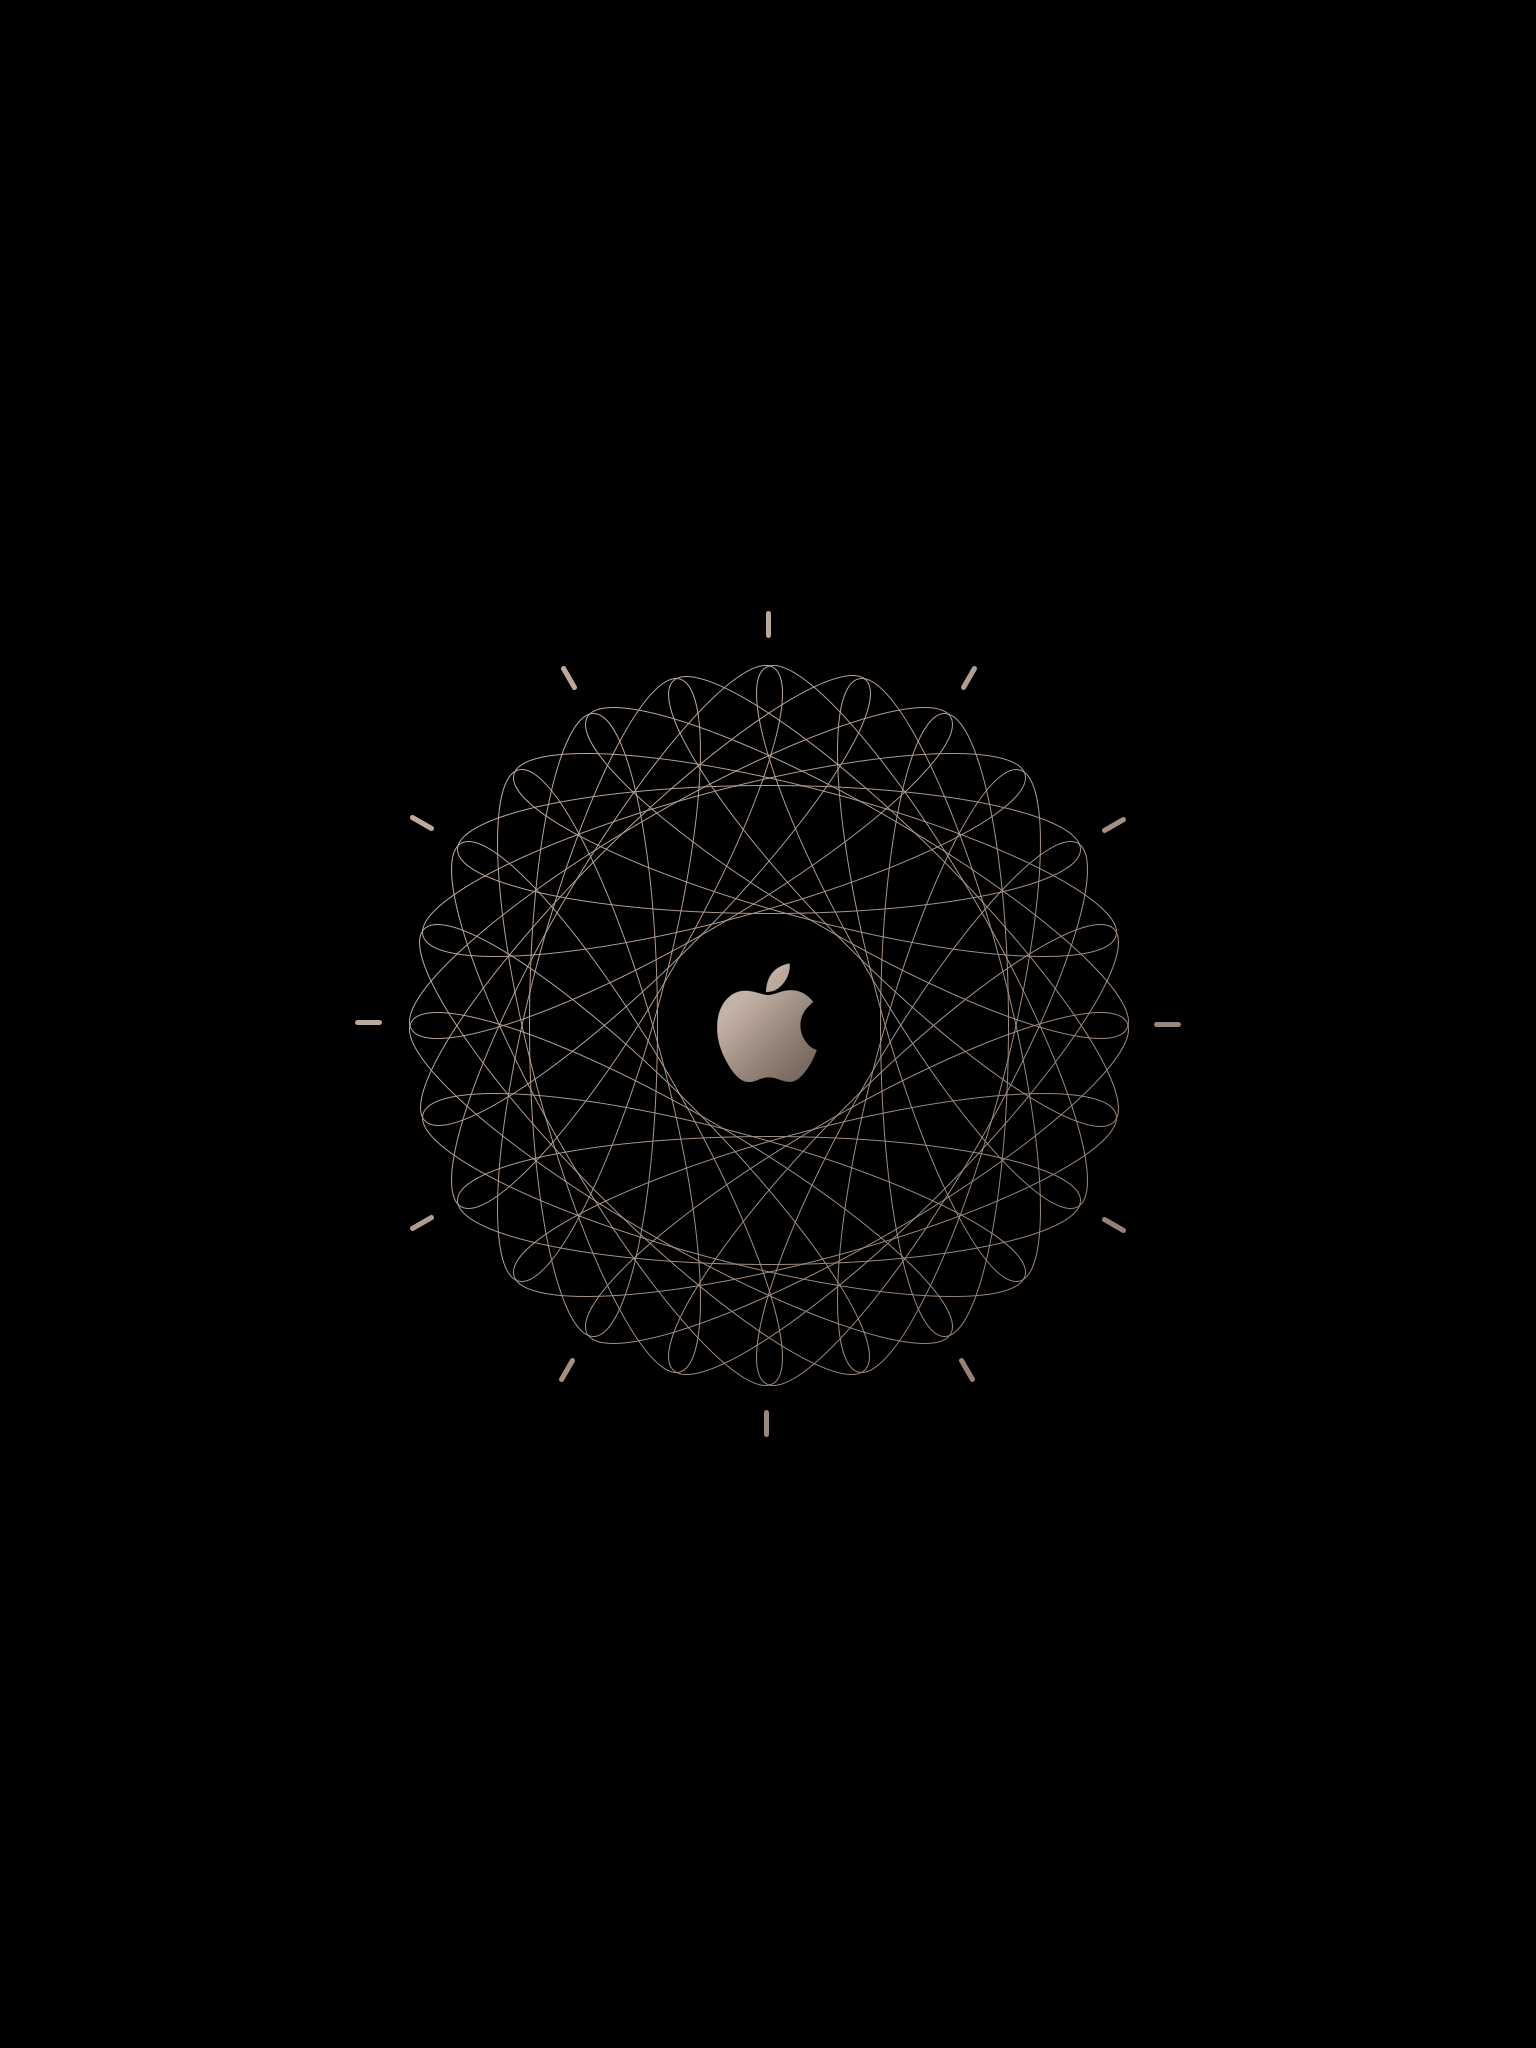 Apple Watch wallpapers for iPhone, iPad, and desktop